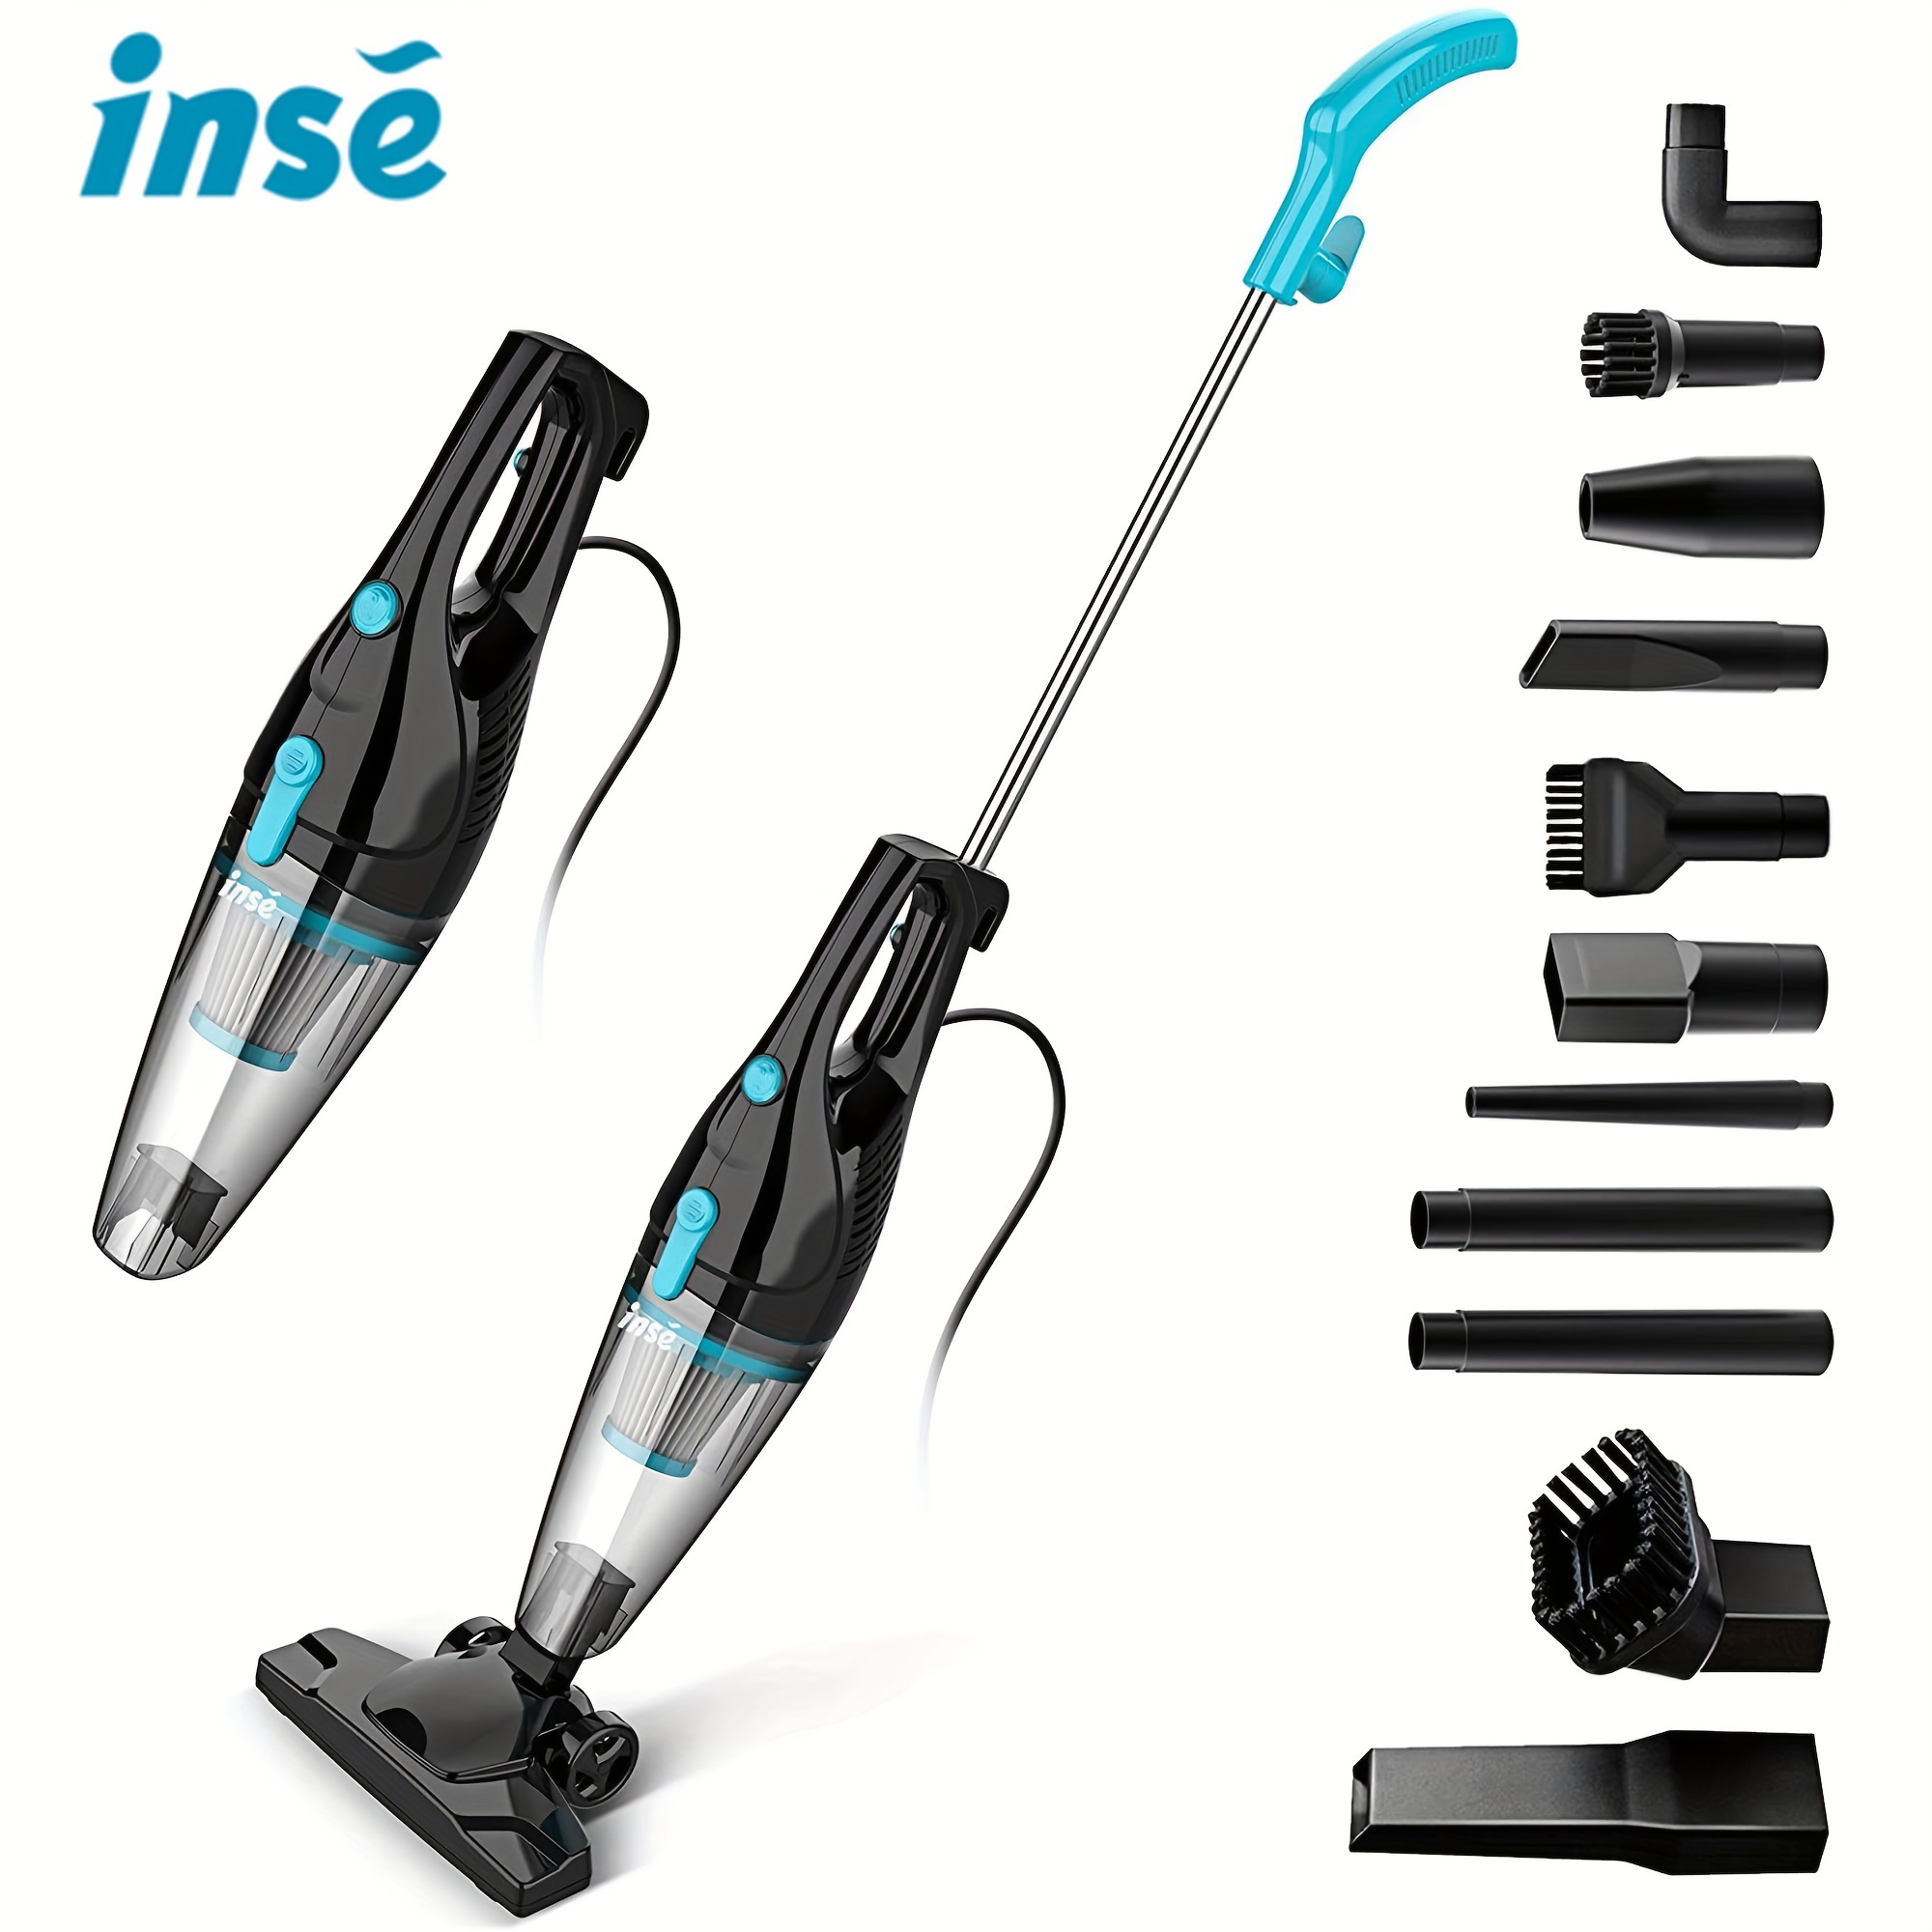 

R3s Corded Vacuum Cleaner, 400w High-performance Motor, 16kpa Strong Suction Power, 9 Different Combinations, Can Flexibly Clean Pet Hair, Dirt, And Dust